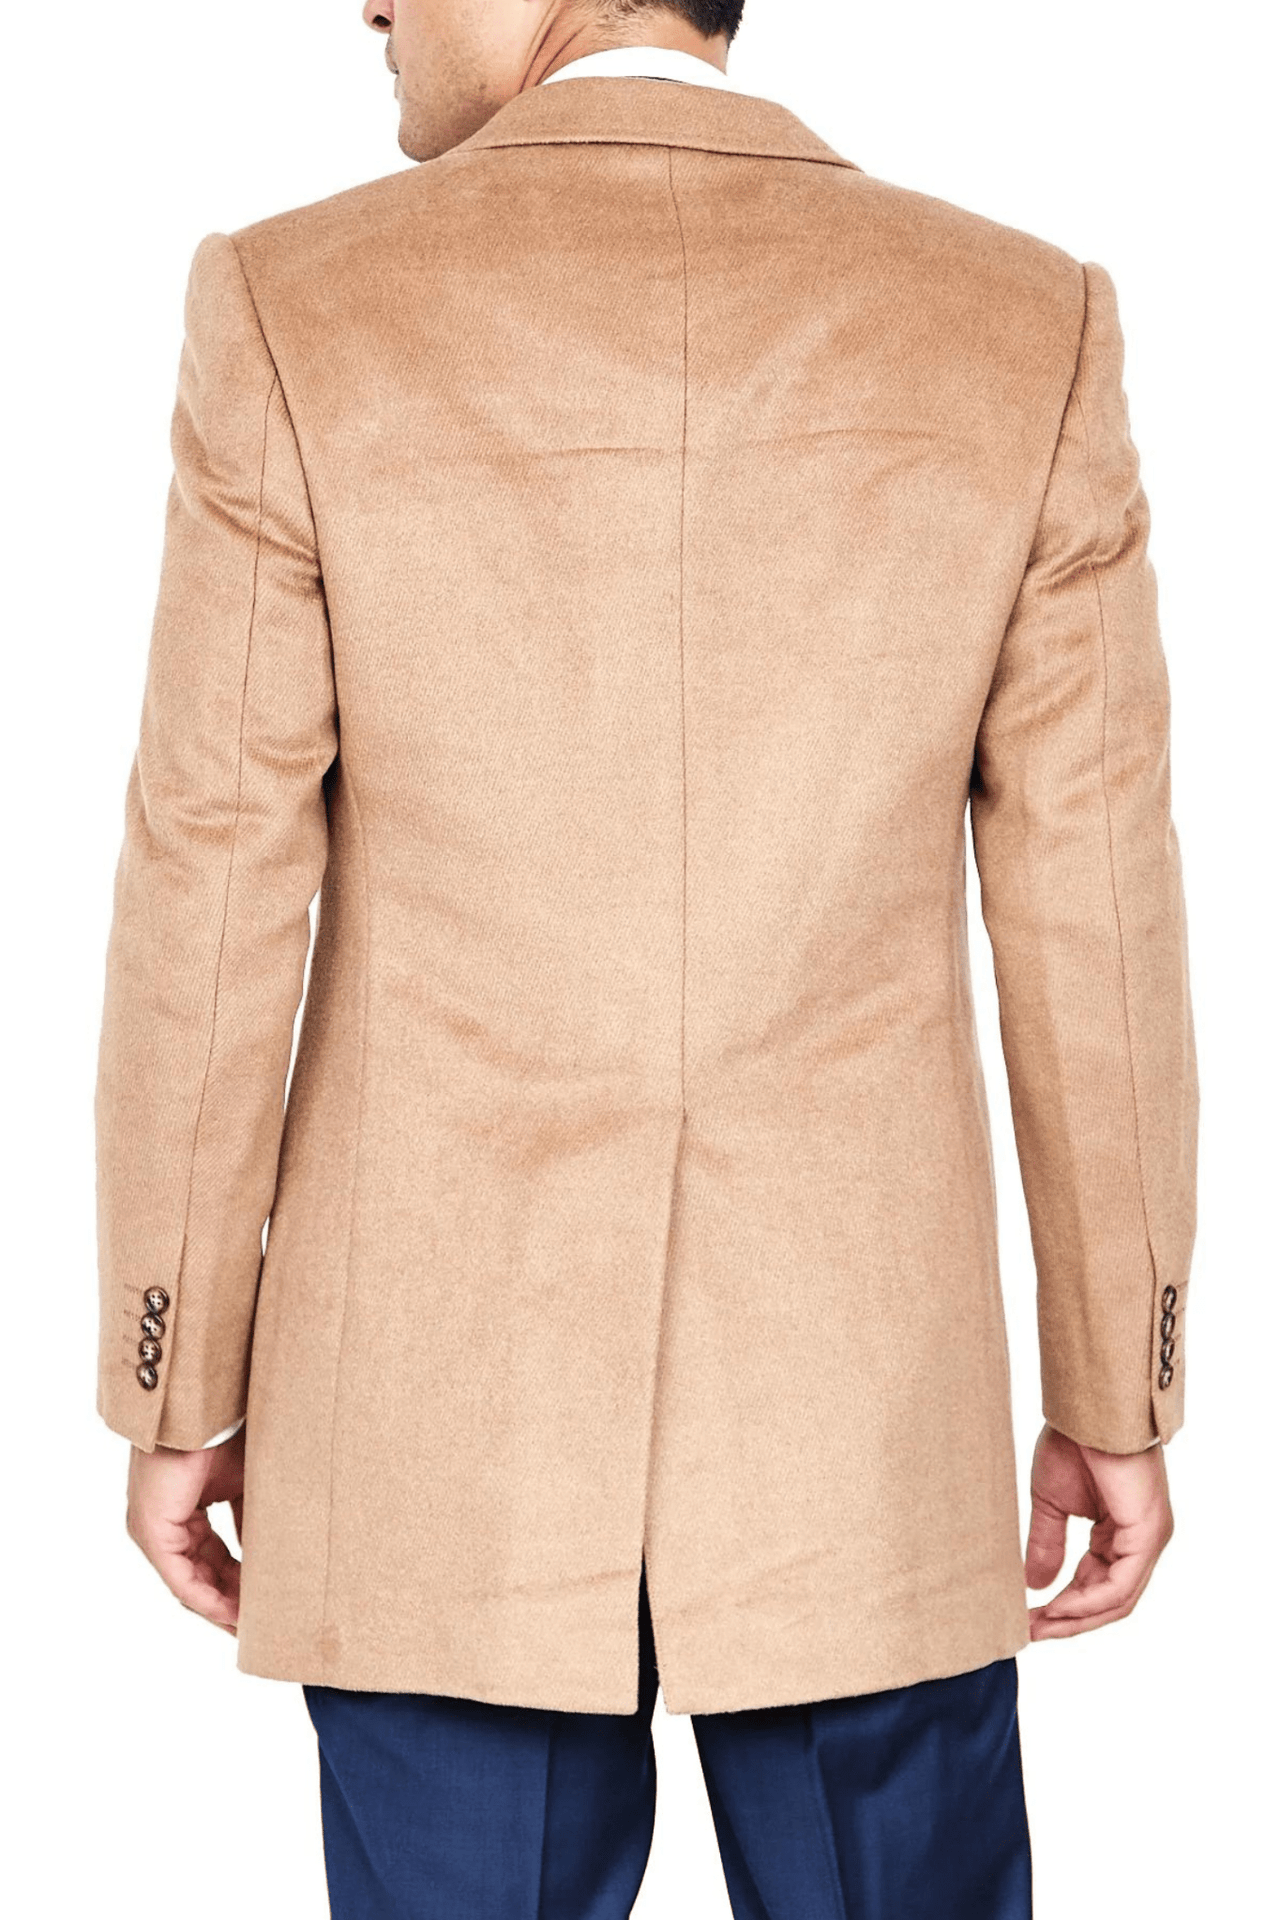 Luxury Overcoat Wool and Cashmere - Camel - Tomasso Black